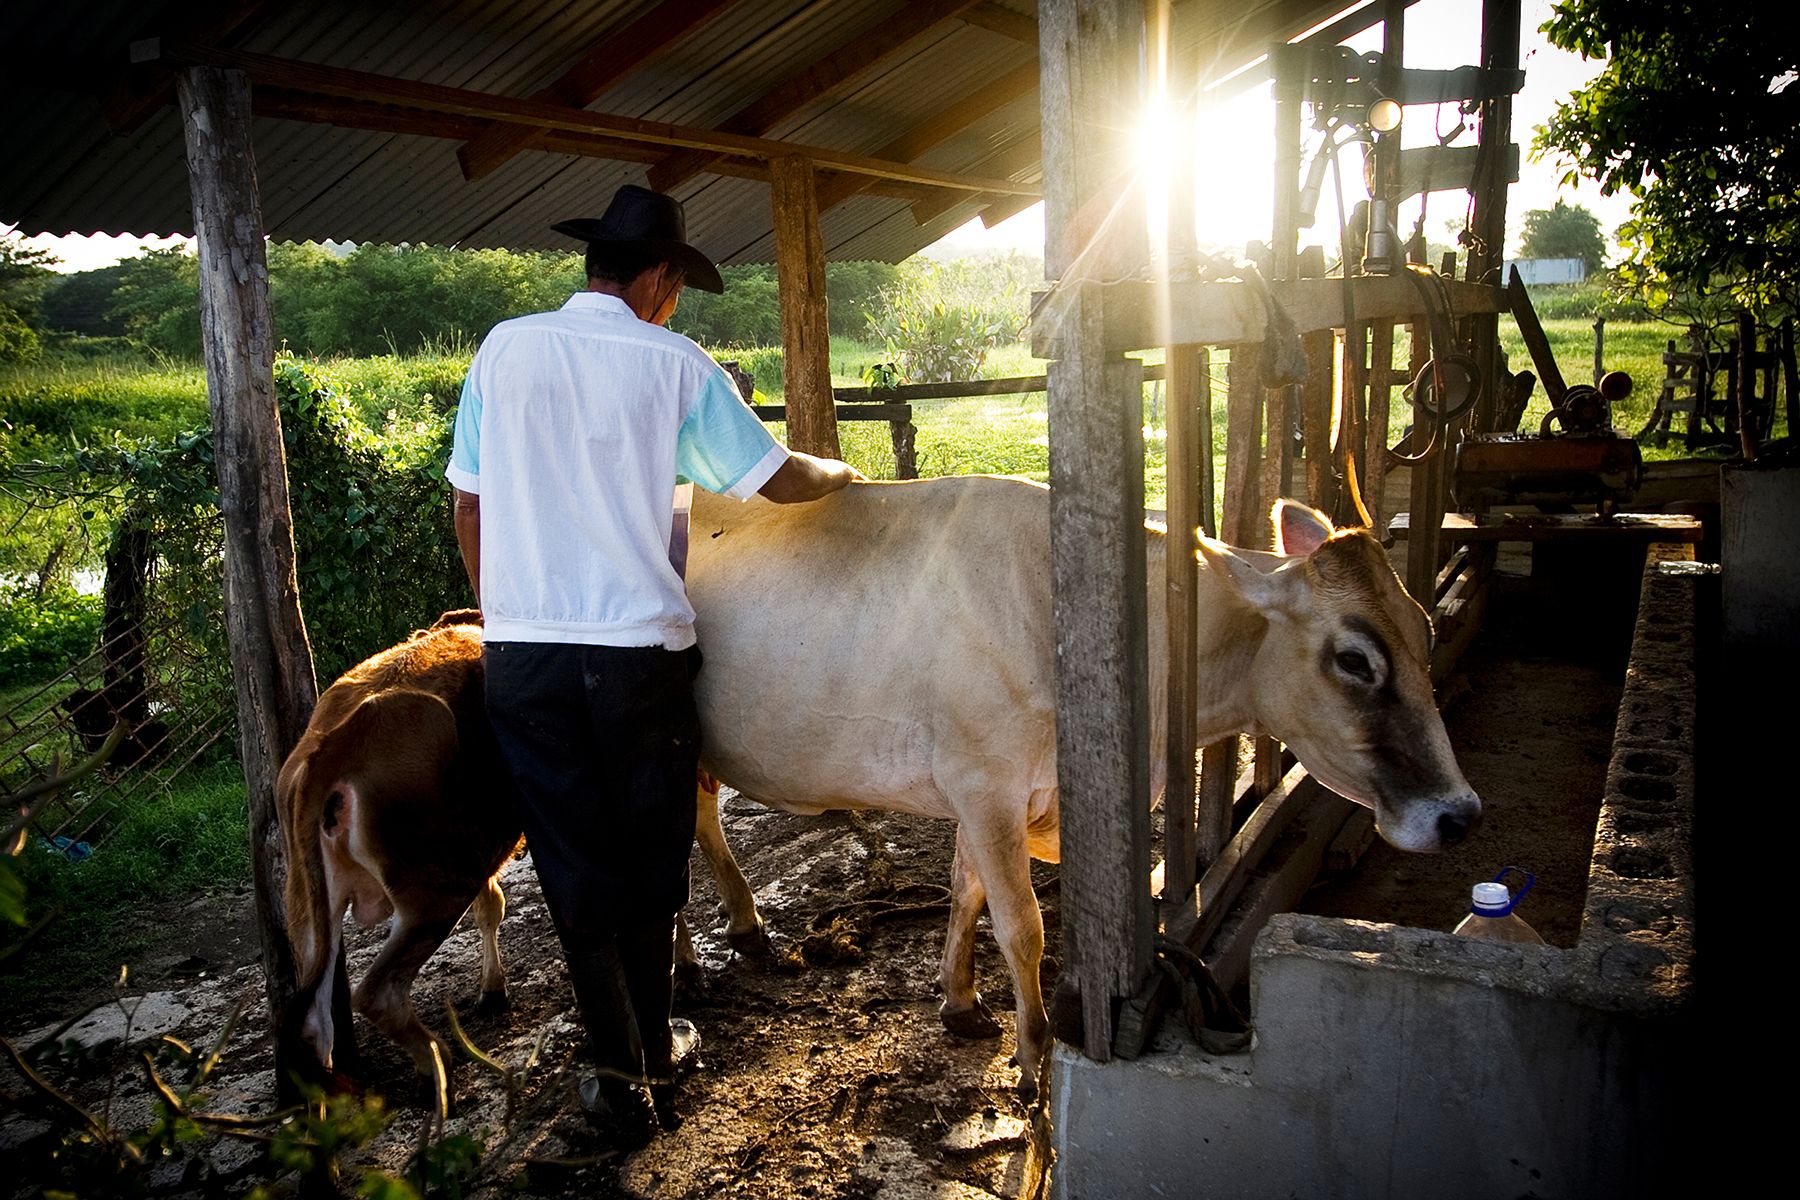 “Dairy farming is the best because you get product out of the animal and you don't have to kill it,” said Oral Rayson, who worked on what once was a thriving dairy farm. Competition from imported powder milk has forced Rayson out of business. In Jamaica there is a paradox: Although the country has an abundant supply of fish, fruits and vegetables, its farmers struggle financially. Cheap imported products drive down costs and cut into profits of local food production. Image by Julia Rendleman. Jamaica, 2011.